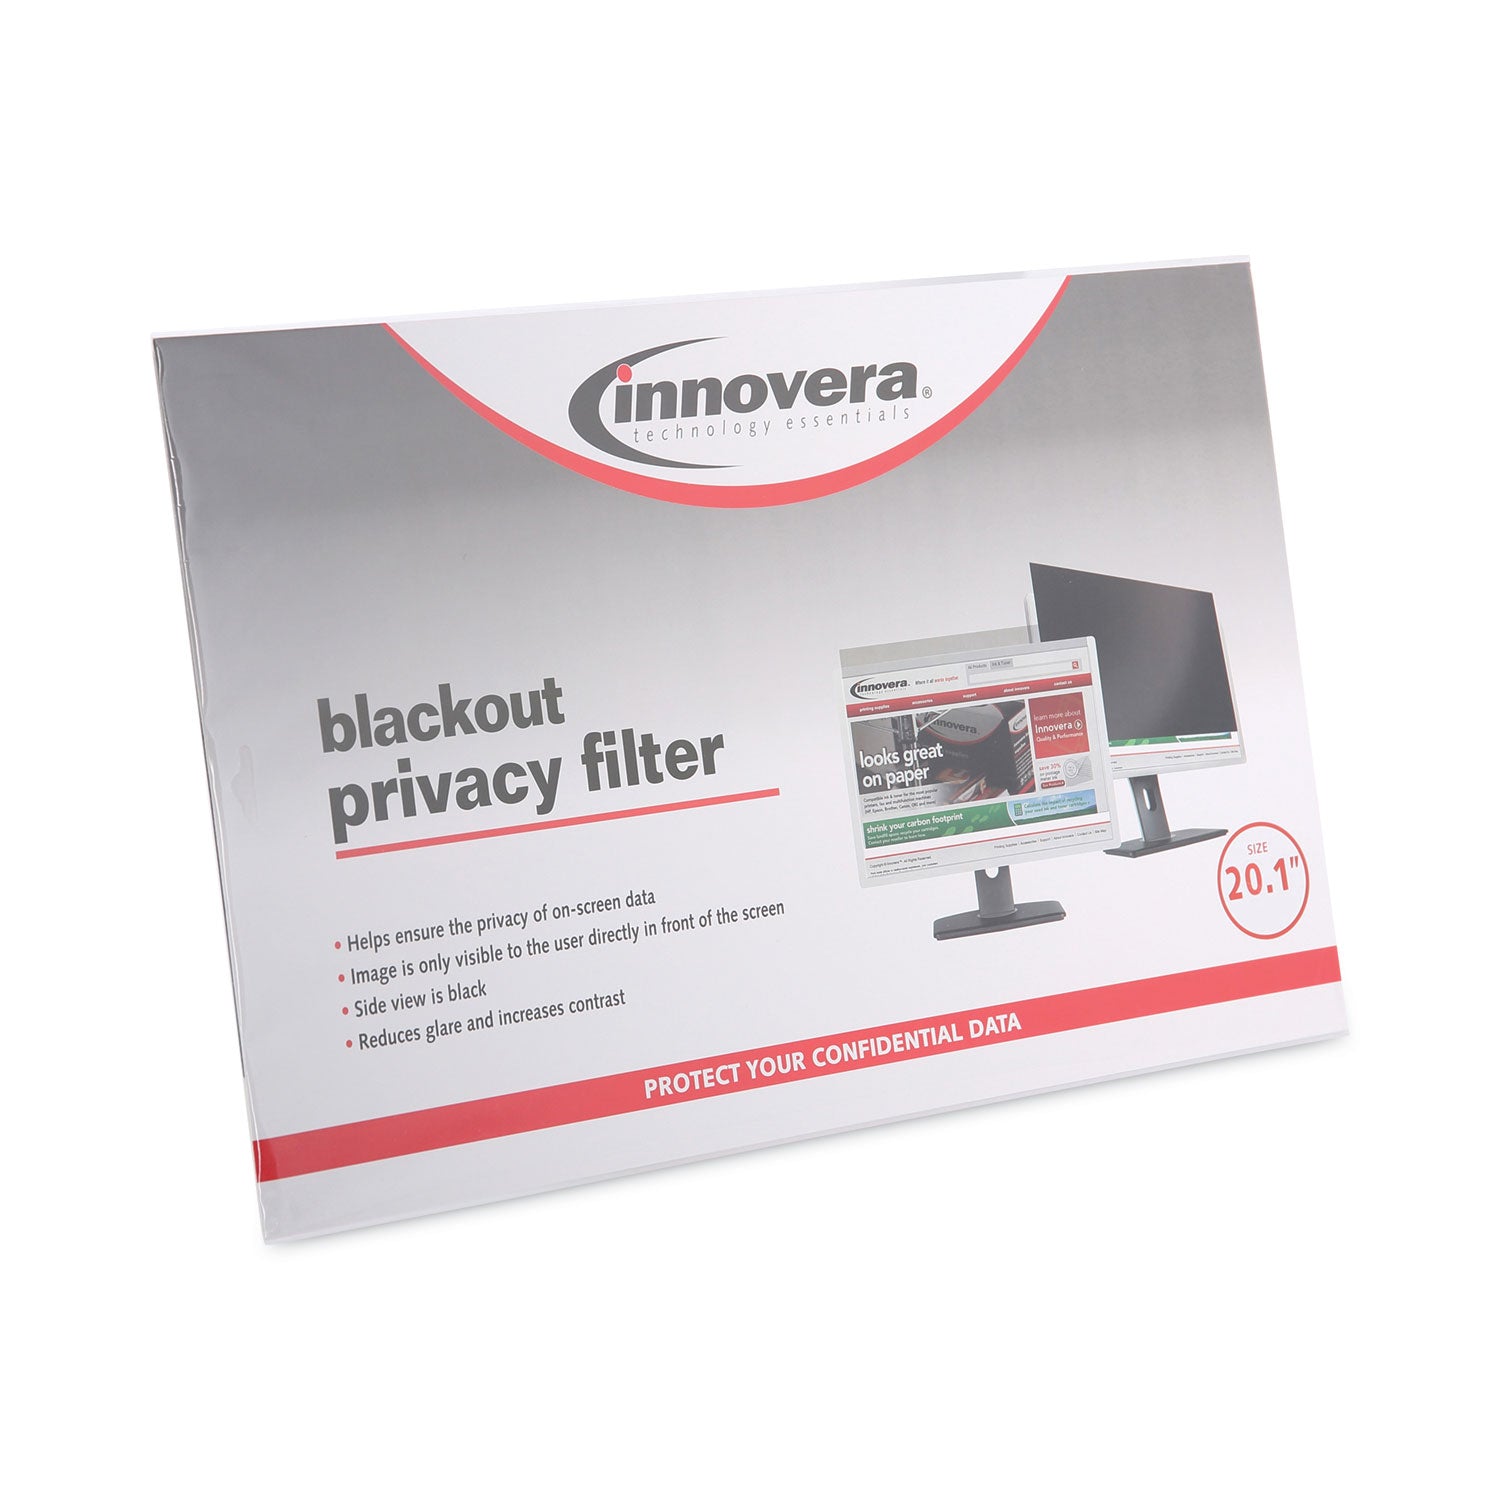 blackout-privacy-monitor-filter-for-201-flat-panel-monitor_ivrblf201 - 2